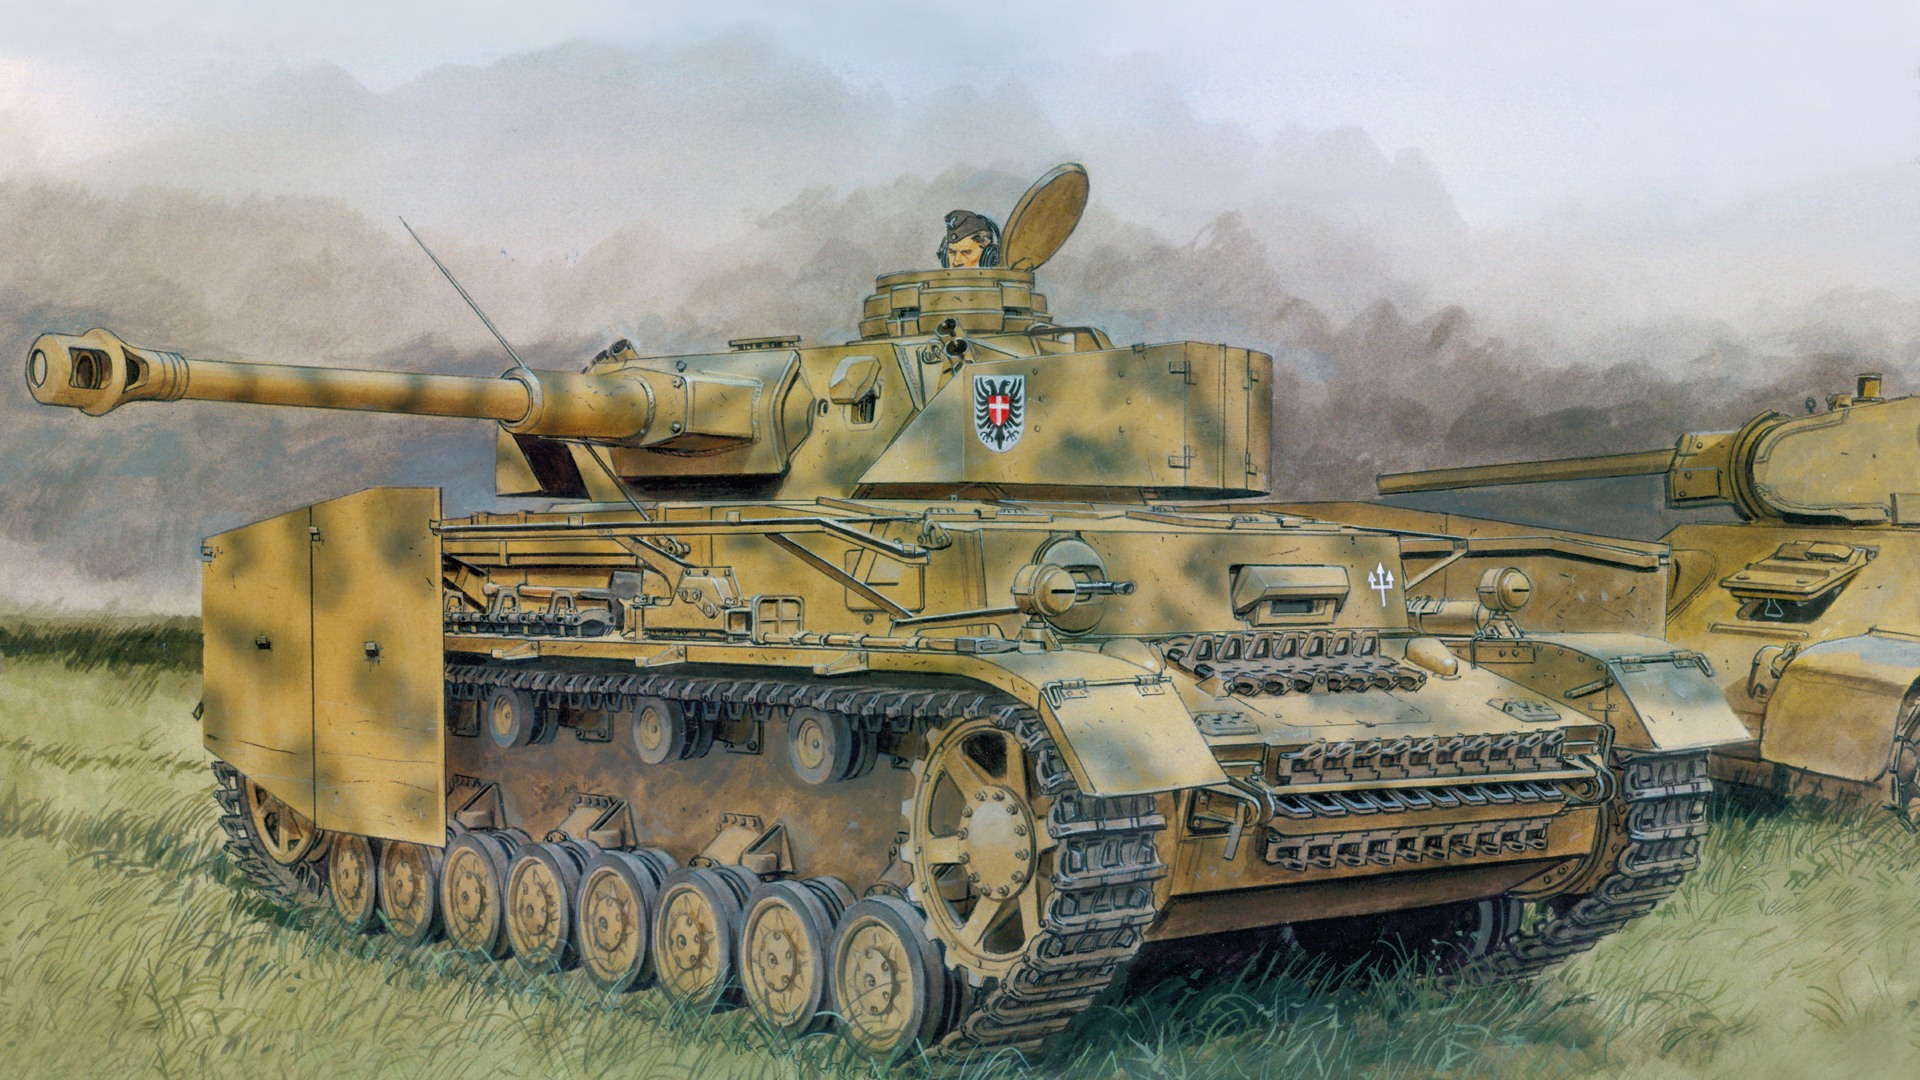 Military tanks, armored HD painting wallpapers #14 - 1920x1080